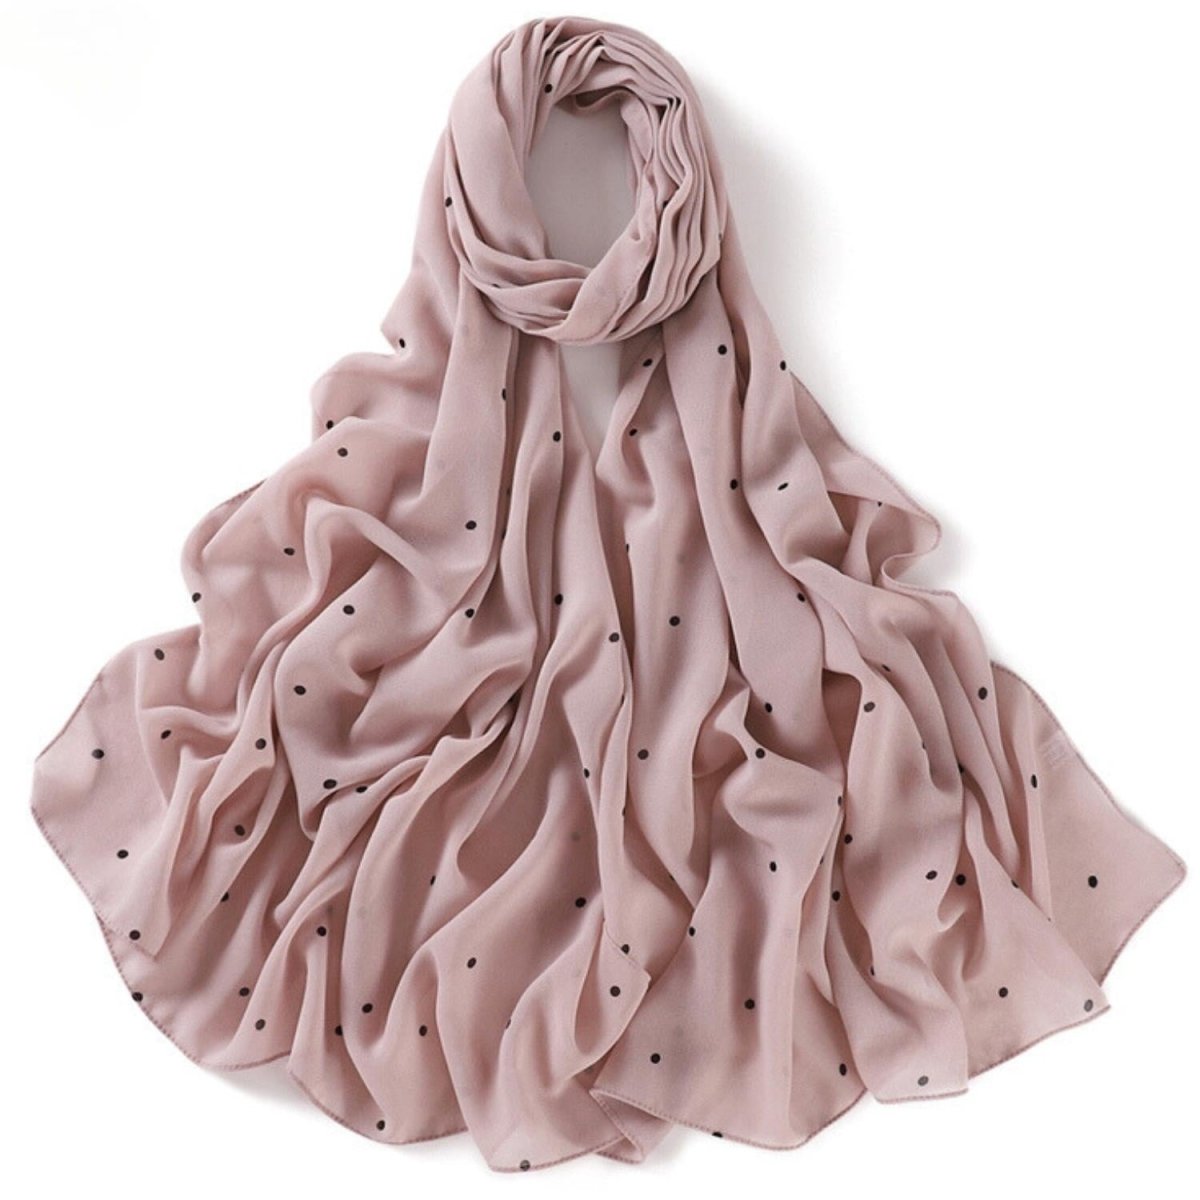 Dusty Pink Polkadot Hijab - Divinity Collection